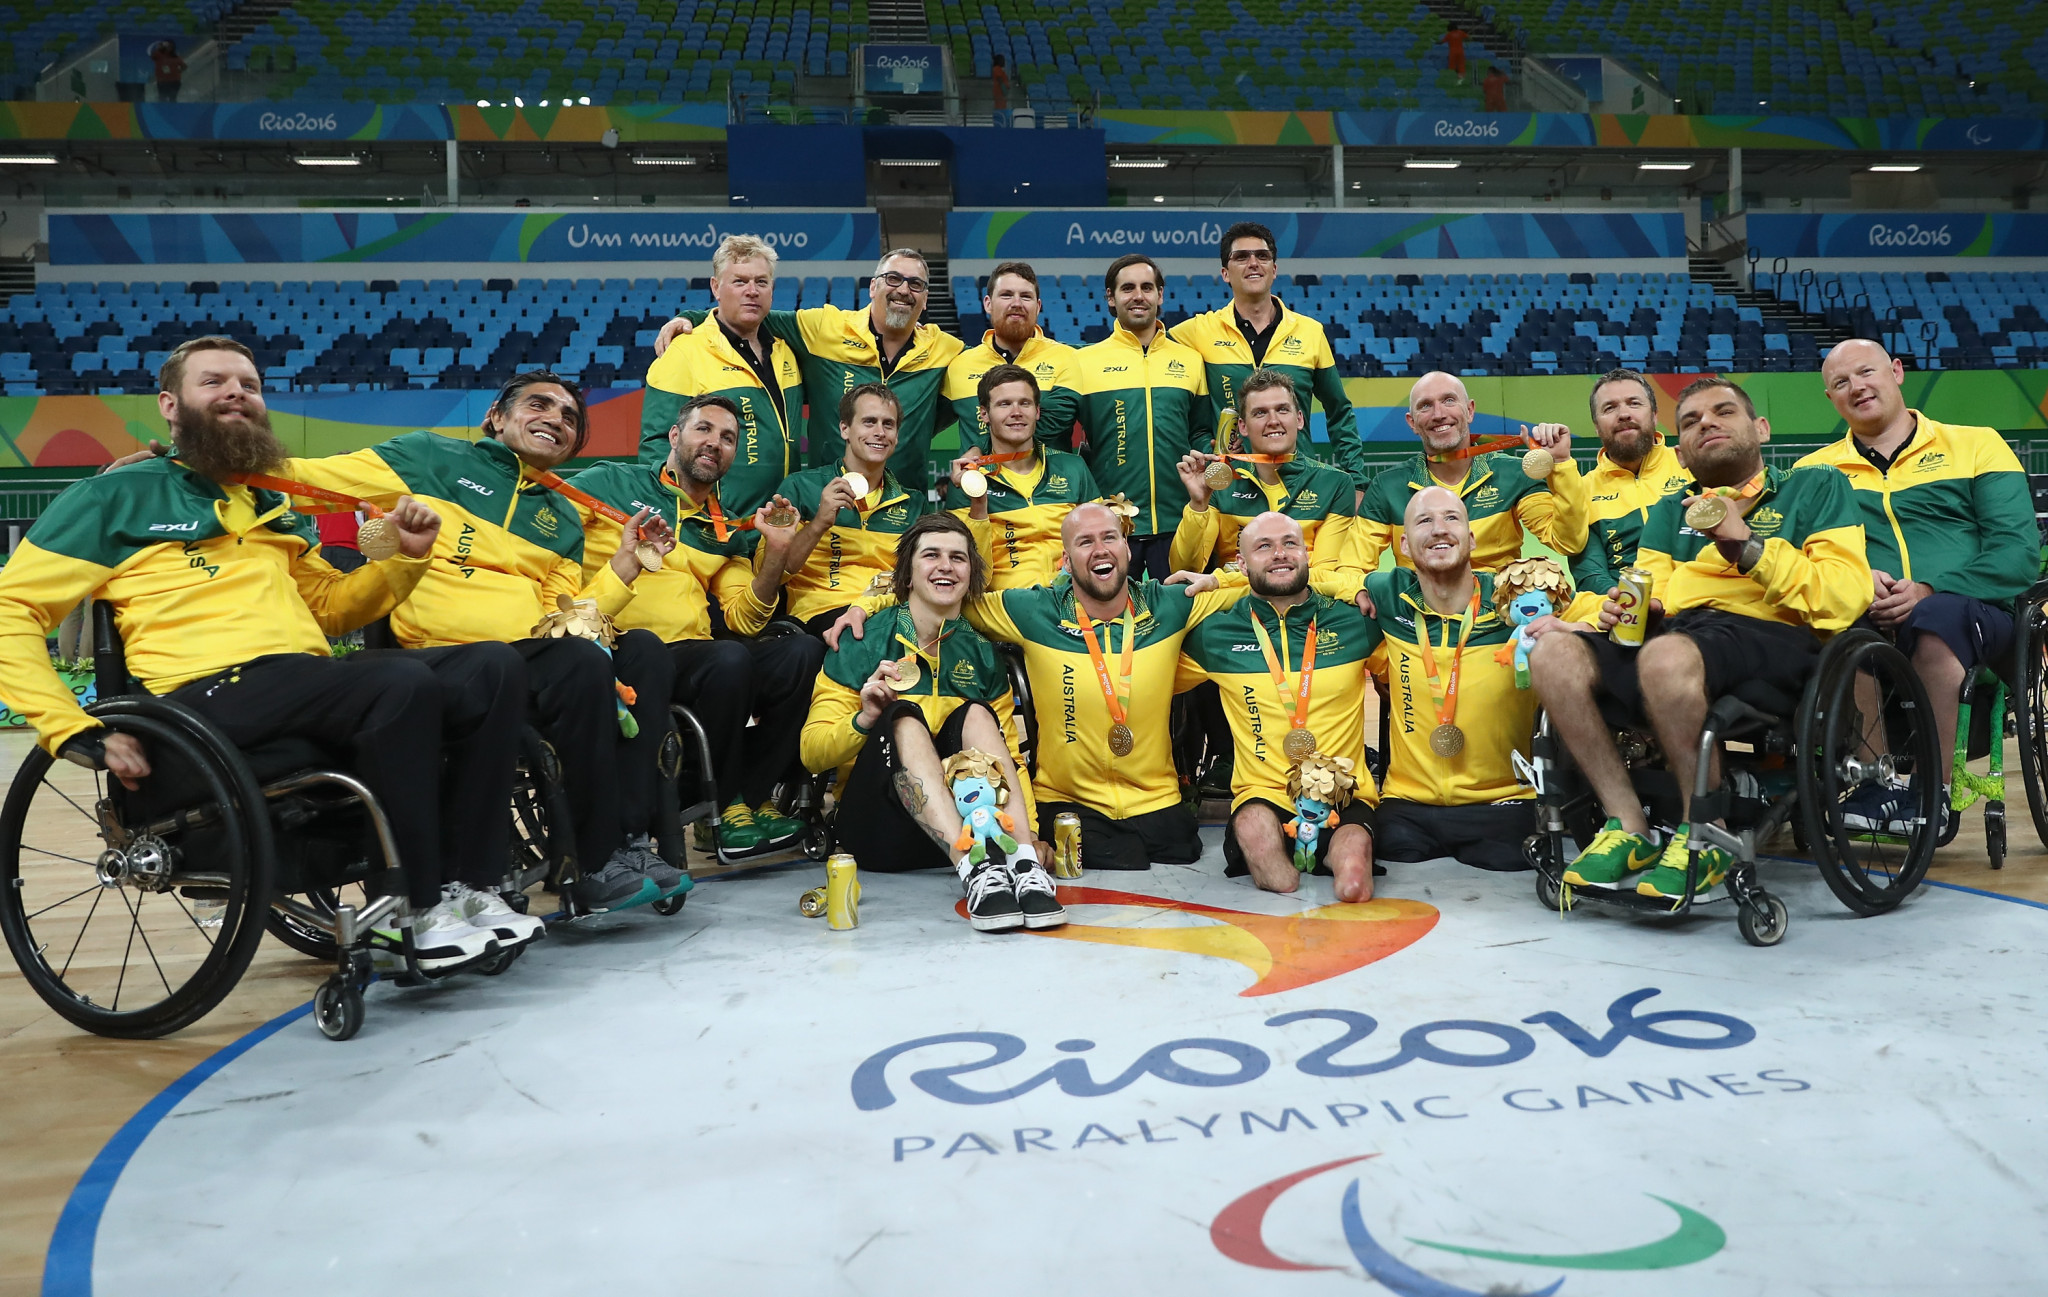 Australia won Paralympic gold medals at London 2012 and 2016 and the 2014 World Championships in Odense  ©Getty Images